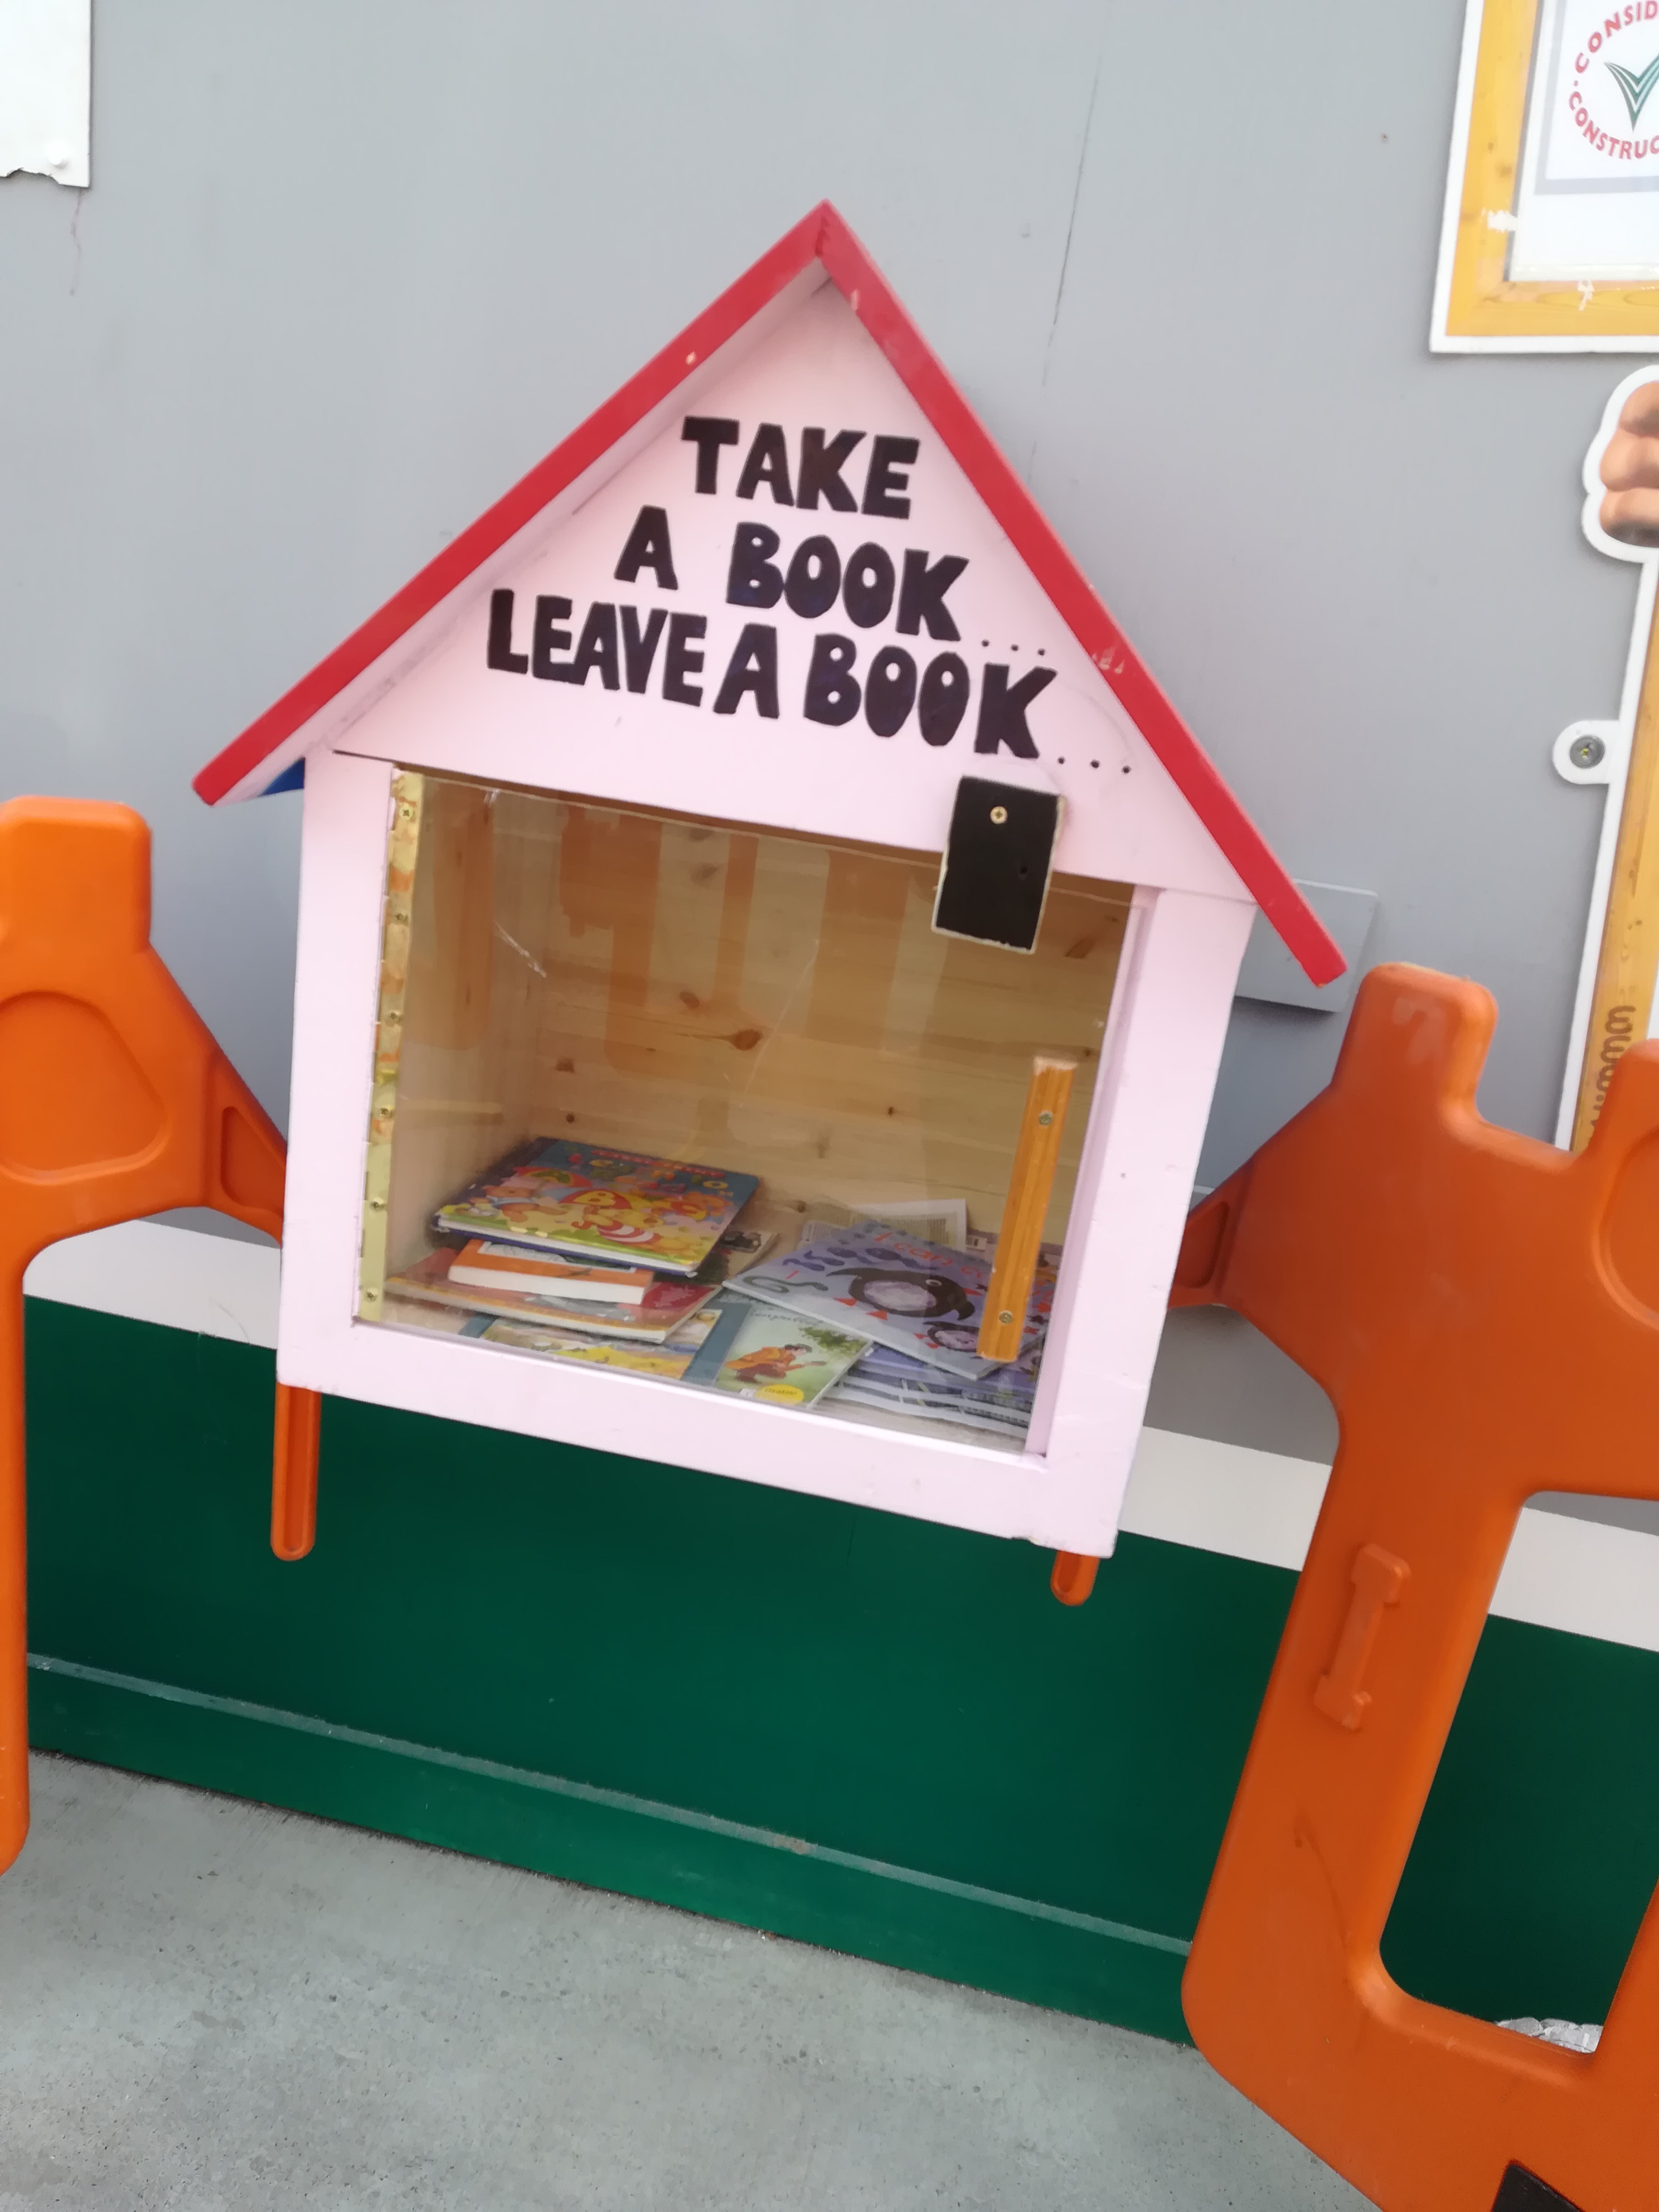 Calling all Dublin city bookworms! There is now a library box on the Coombe